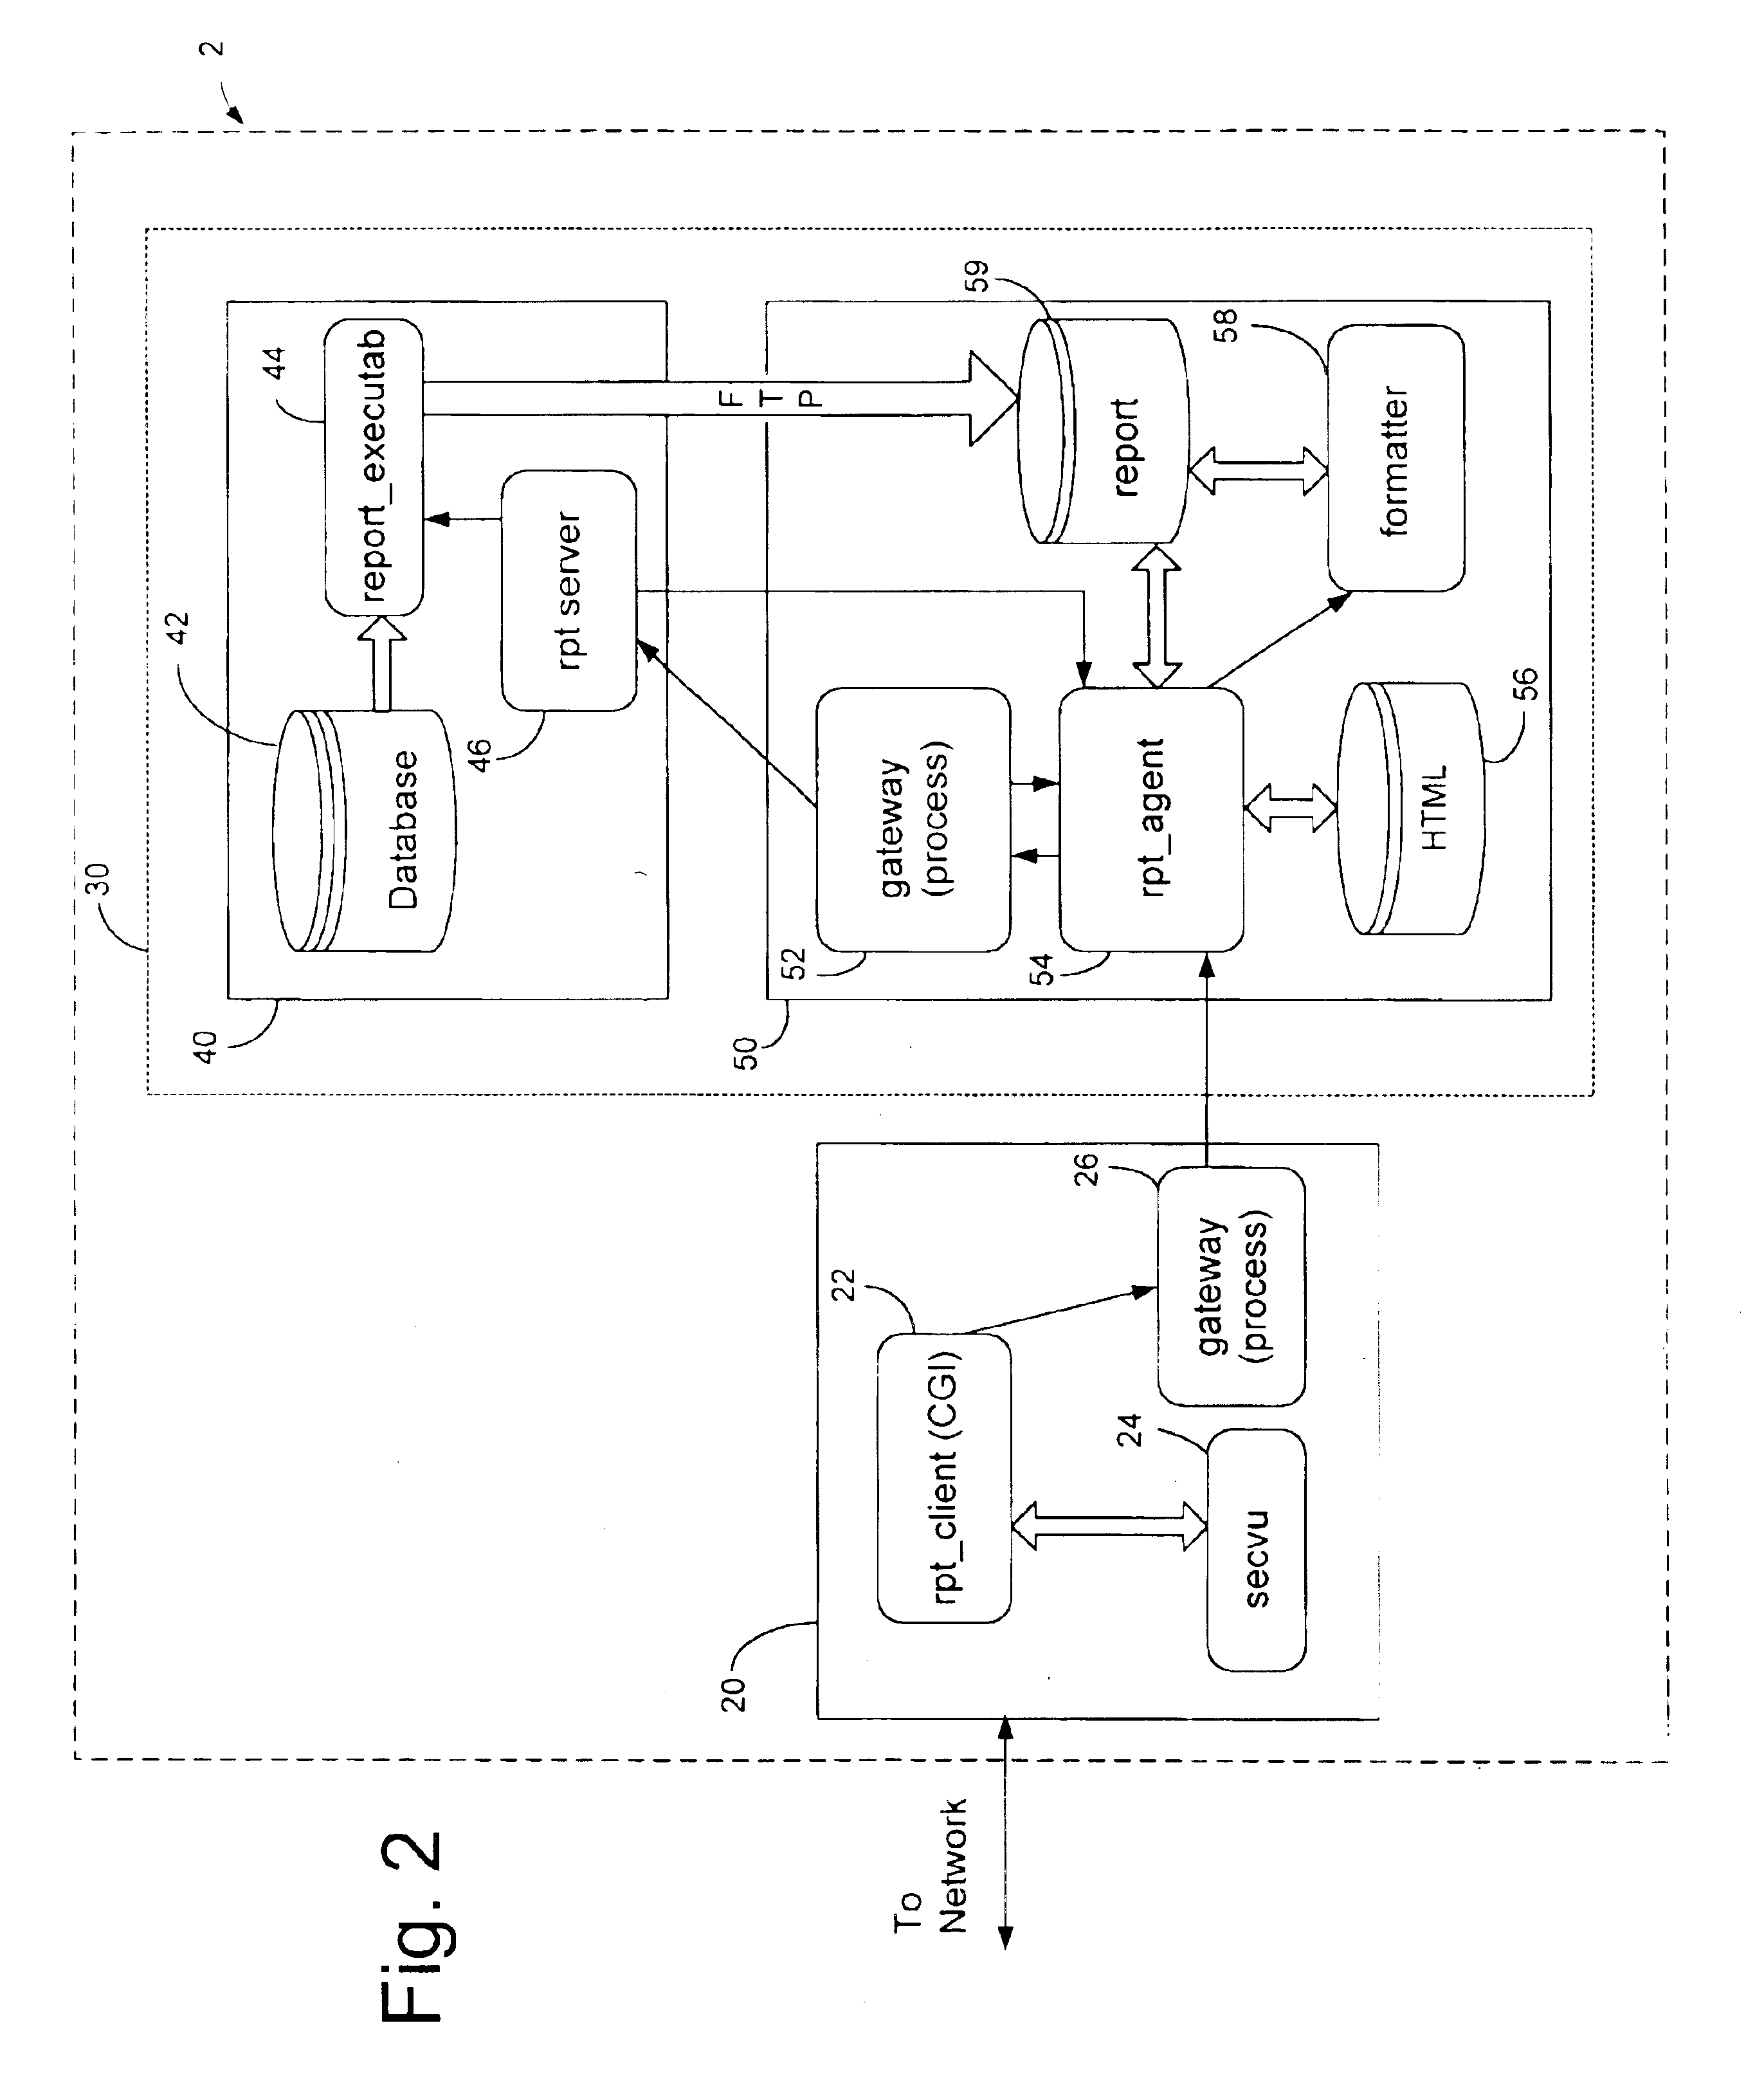 System and method for generating reports in a telecommunication system